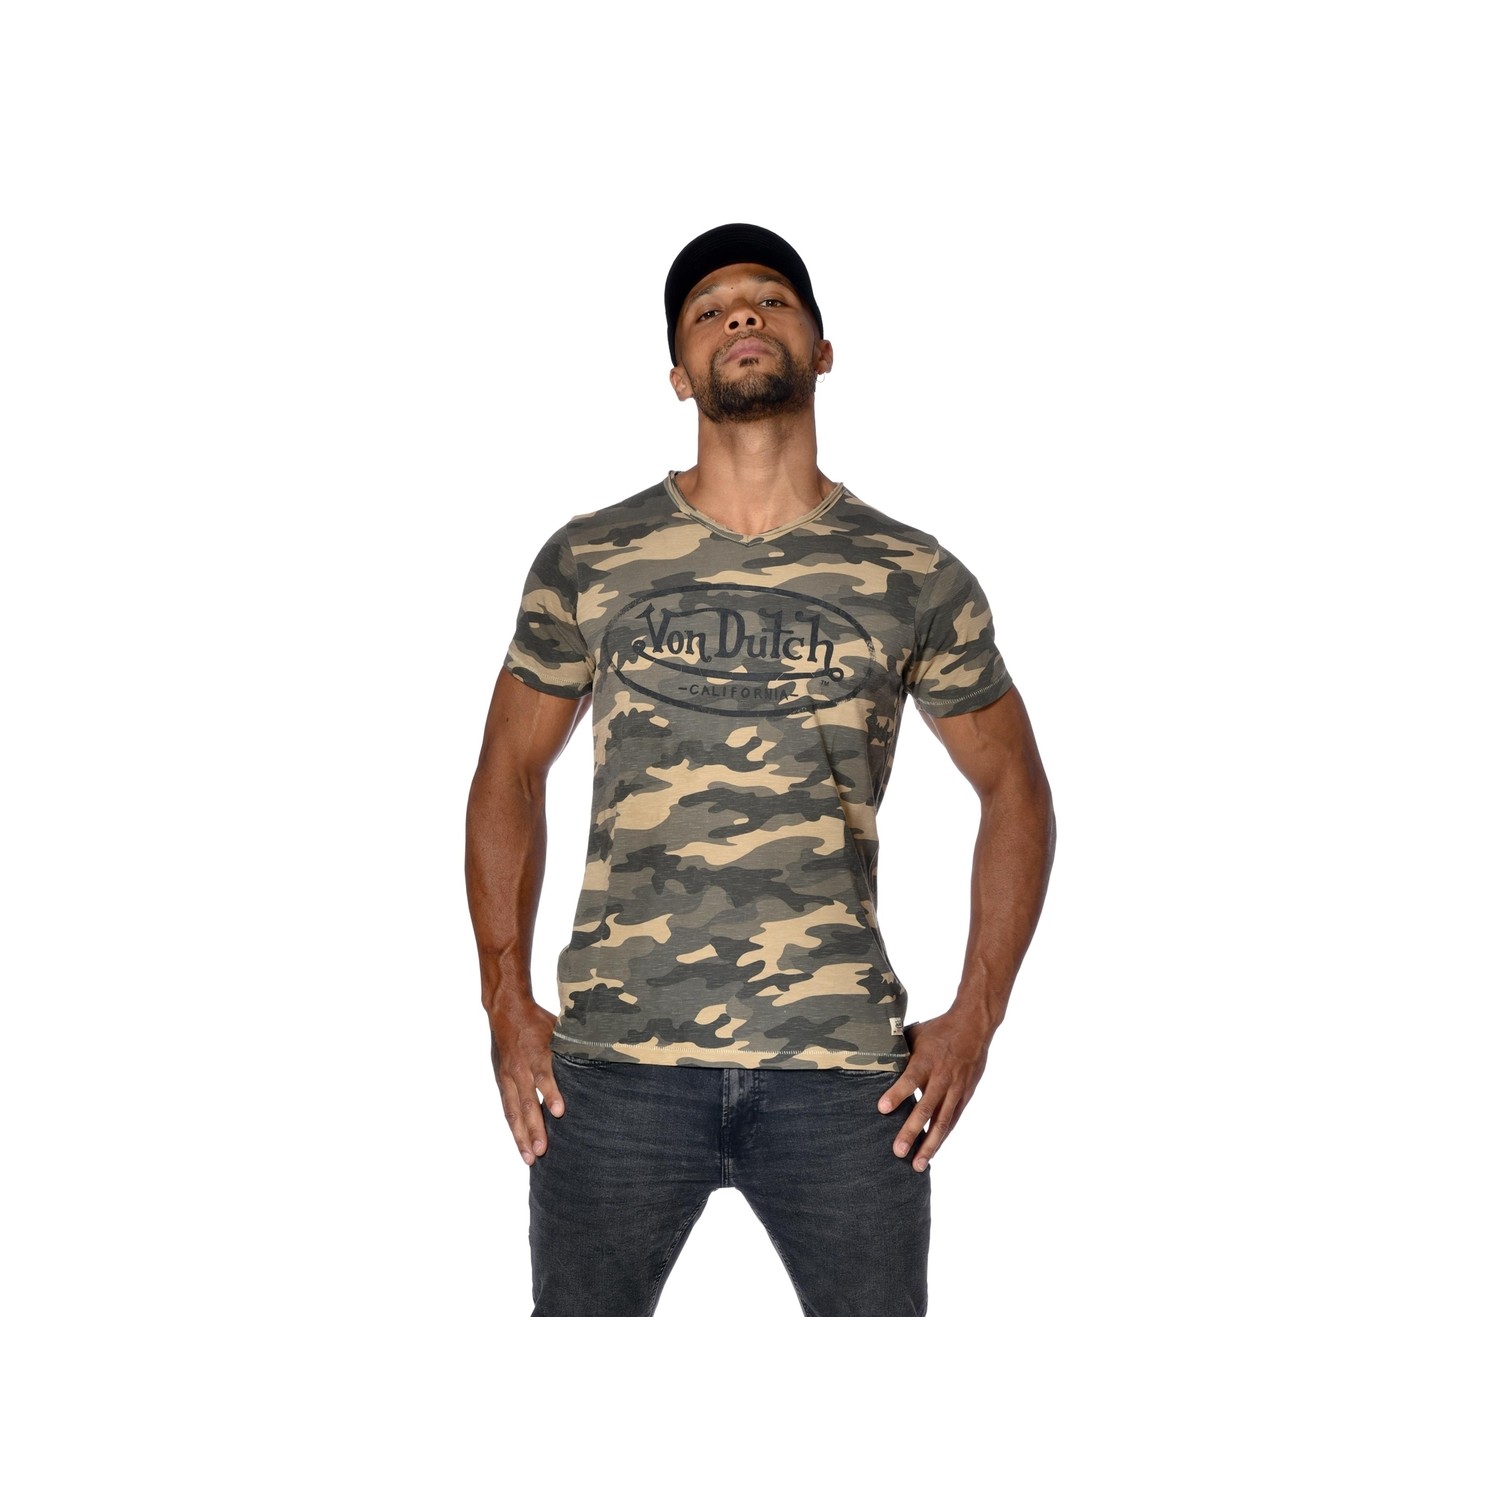 T-shirt homme col V slim fit Camouflage Ron